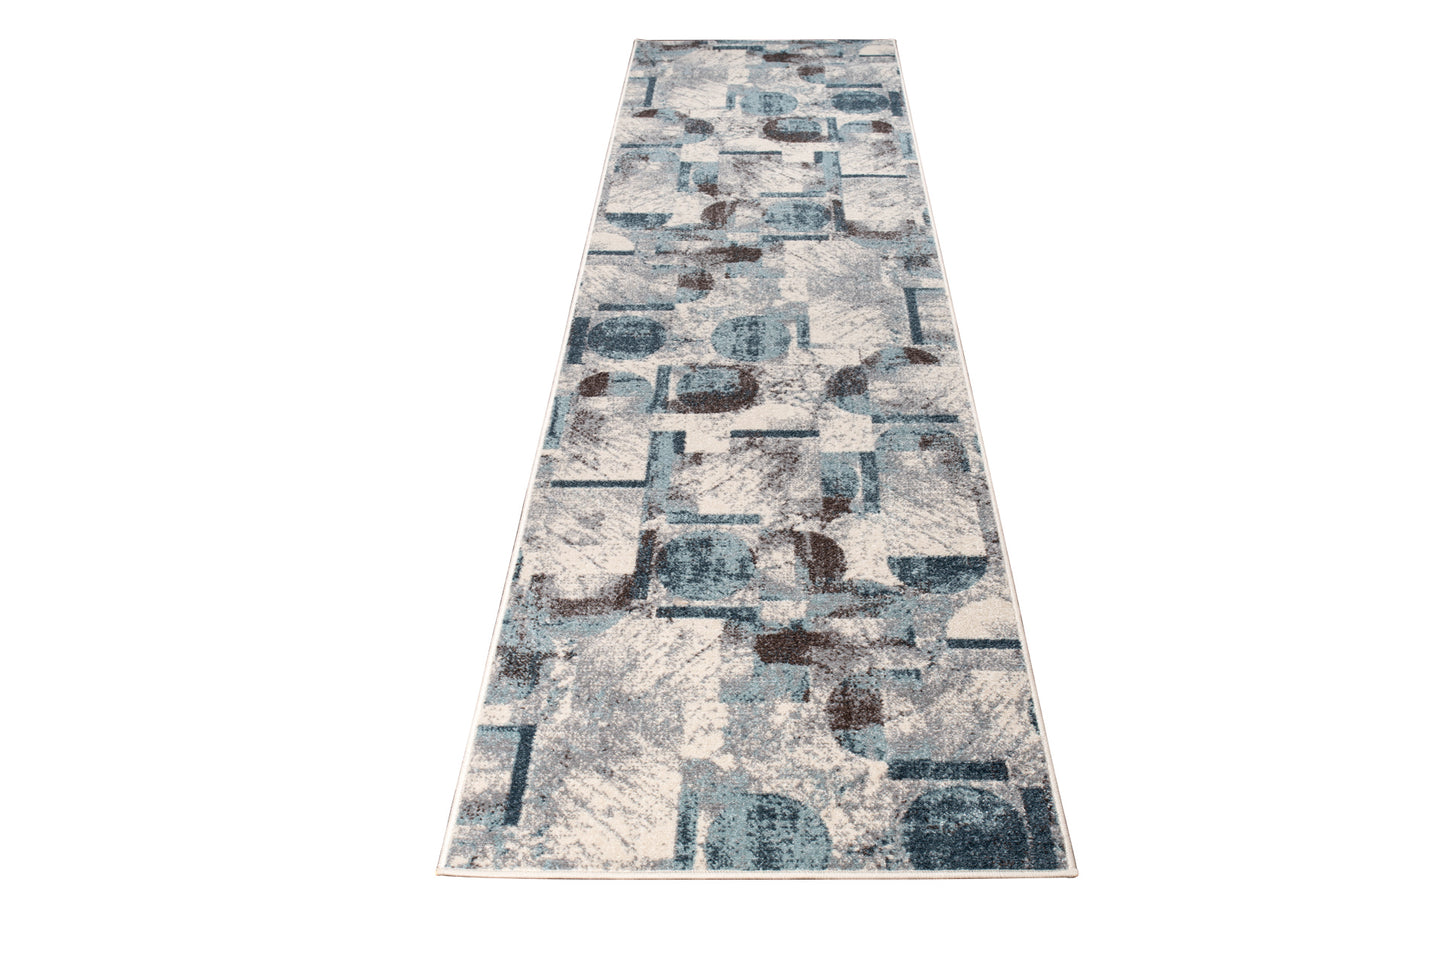 blue brown ivory geometric abstract rustic modern contemporary living room area rug 9x12, 10x13 ft Large Big Carpet, Living Room, Beroom